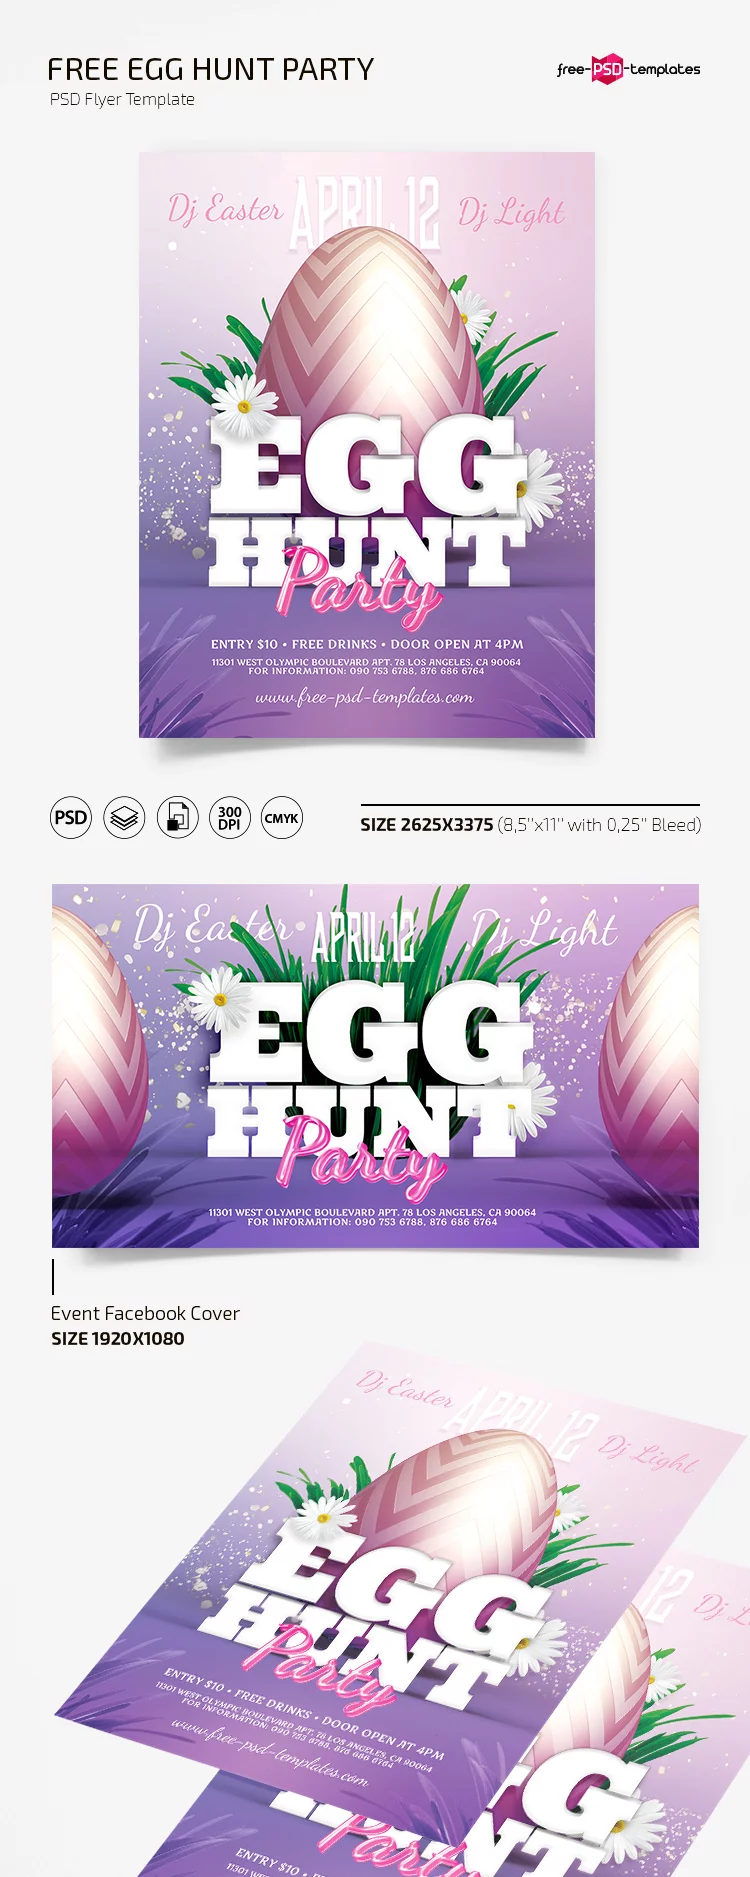 Free Egg Hunt Flyer Template in PSD